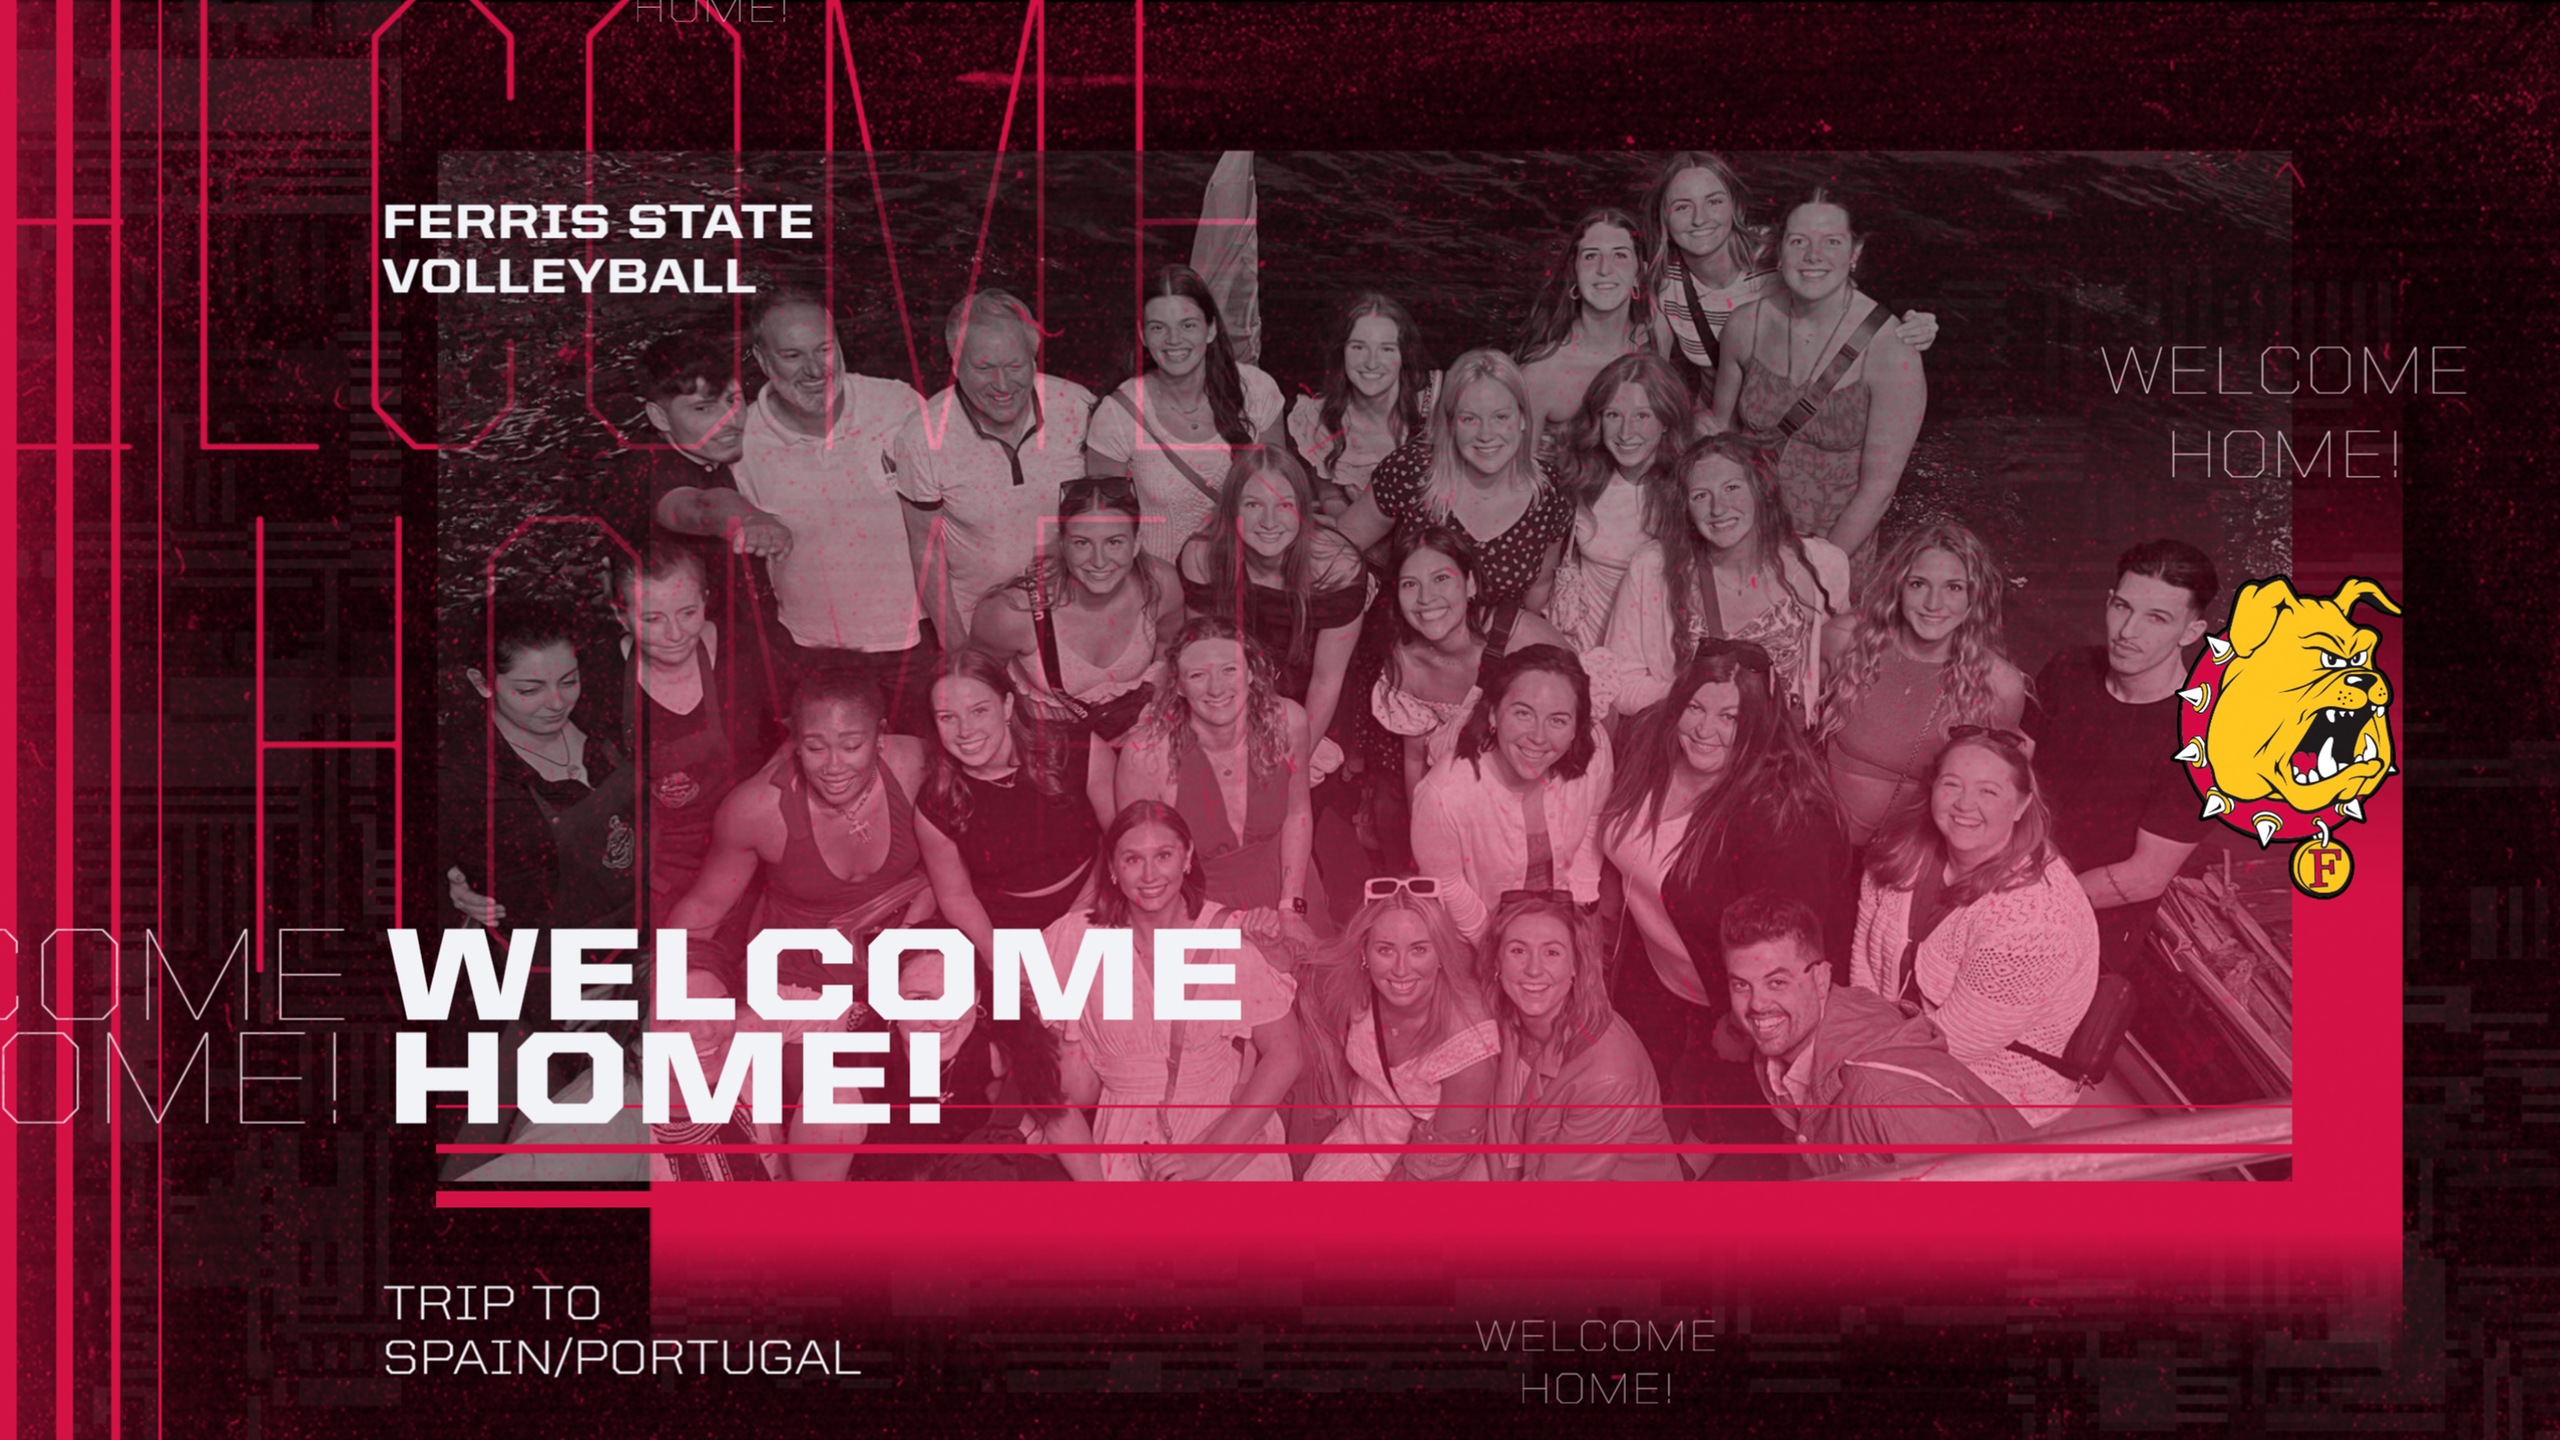 WELCOME HOME! Ferris State Volleyball Returns After Trip To Spain/Portugal